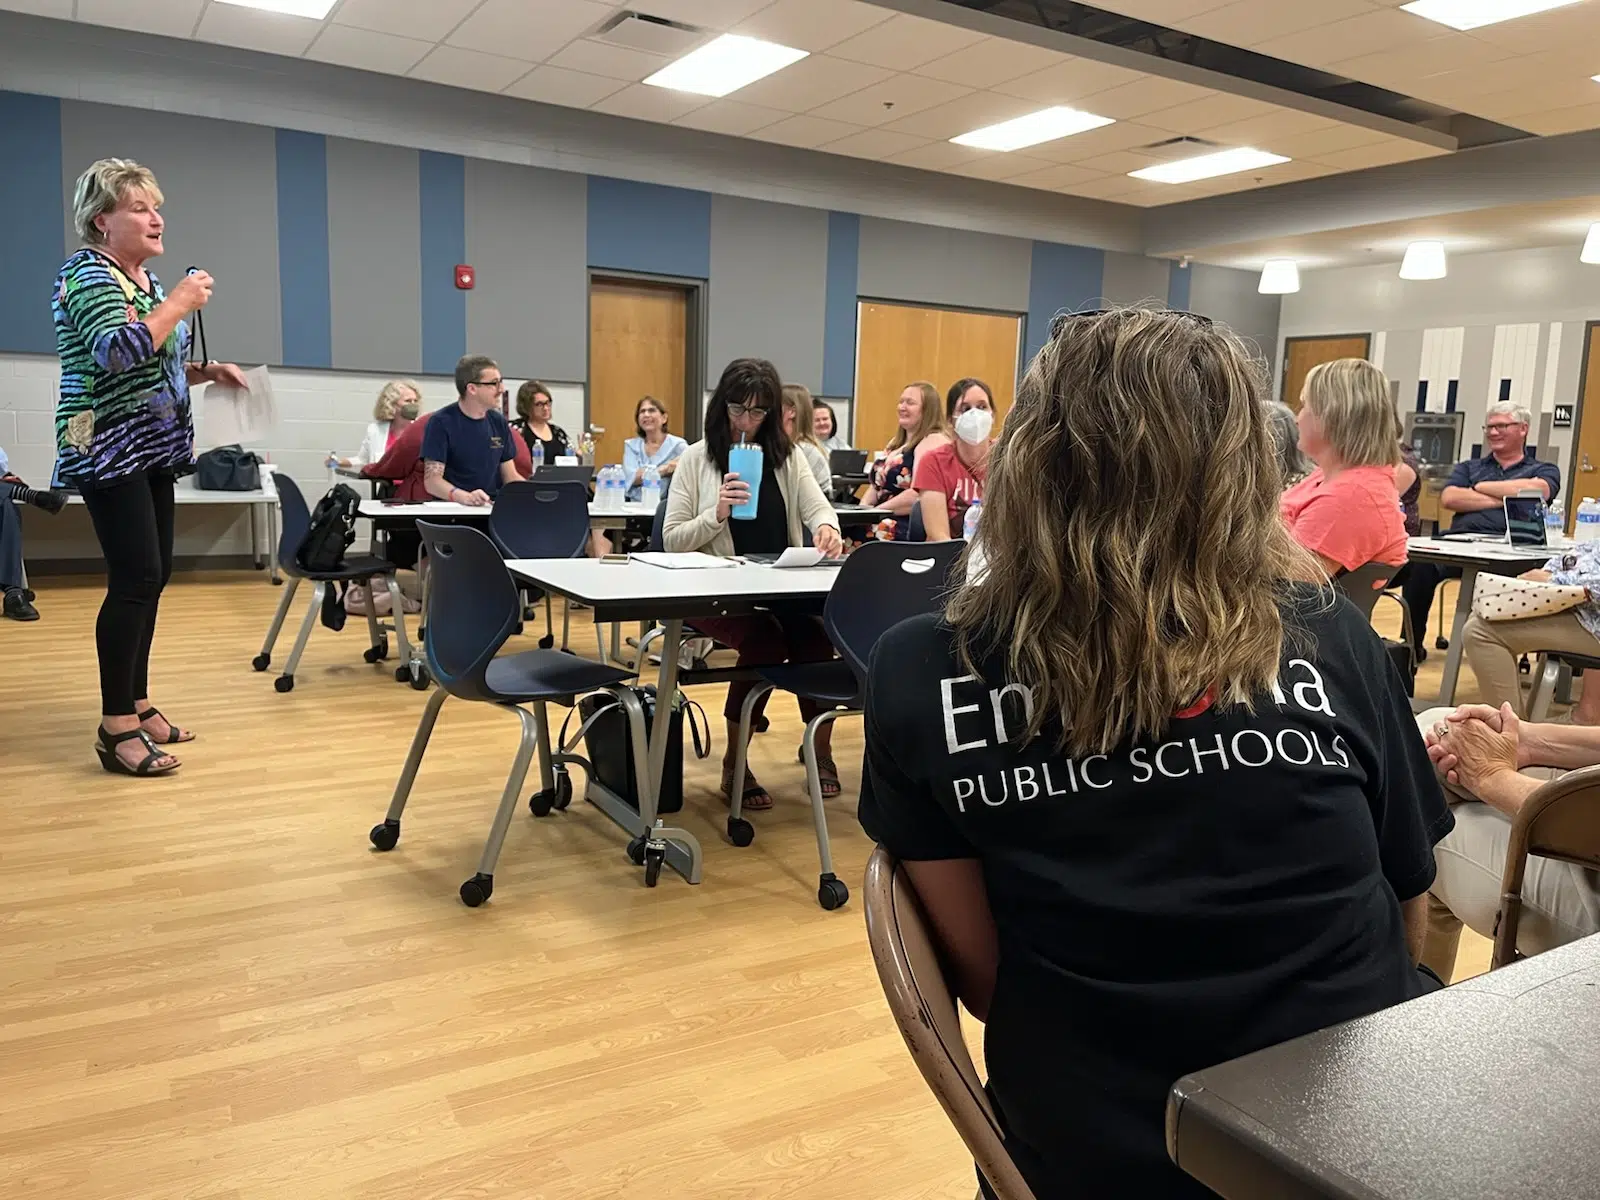 USD 253's Enrollment Study Work Group discusses options for 'right-sizing' district